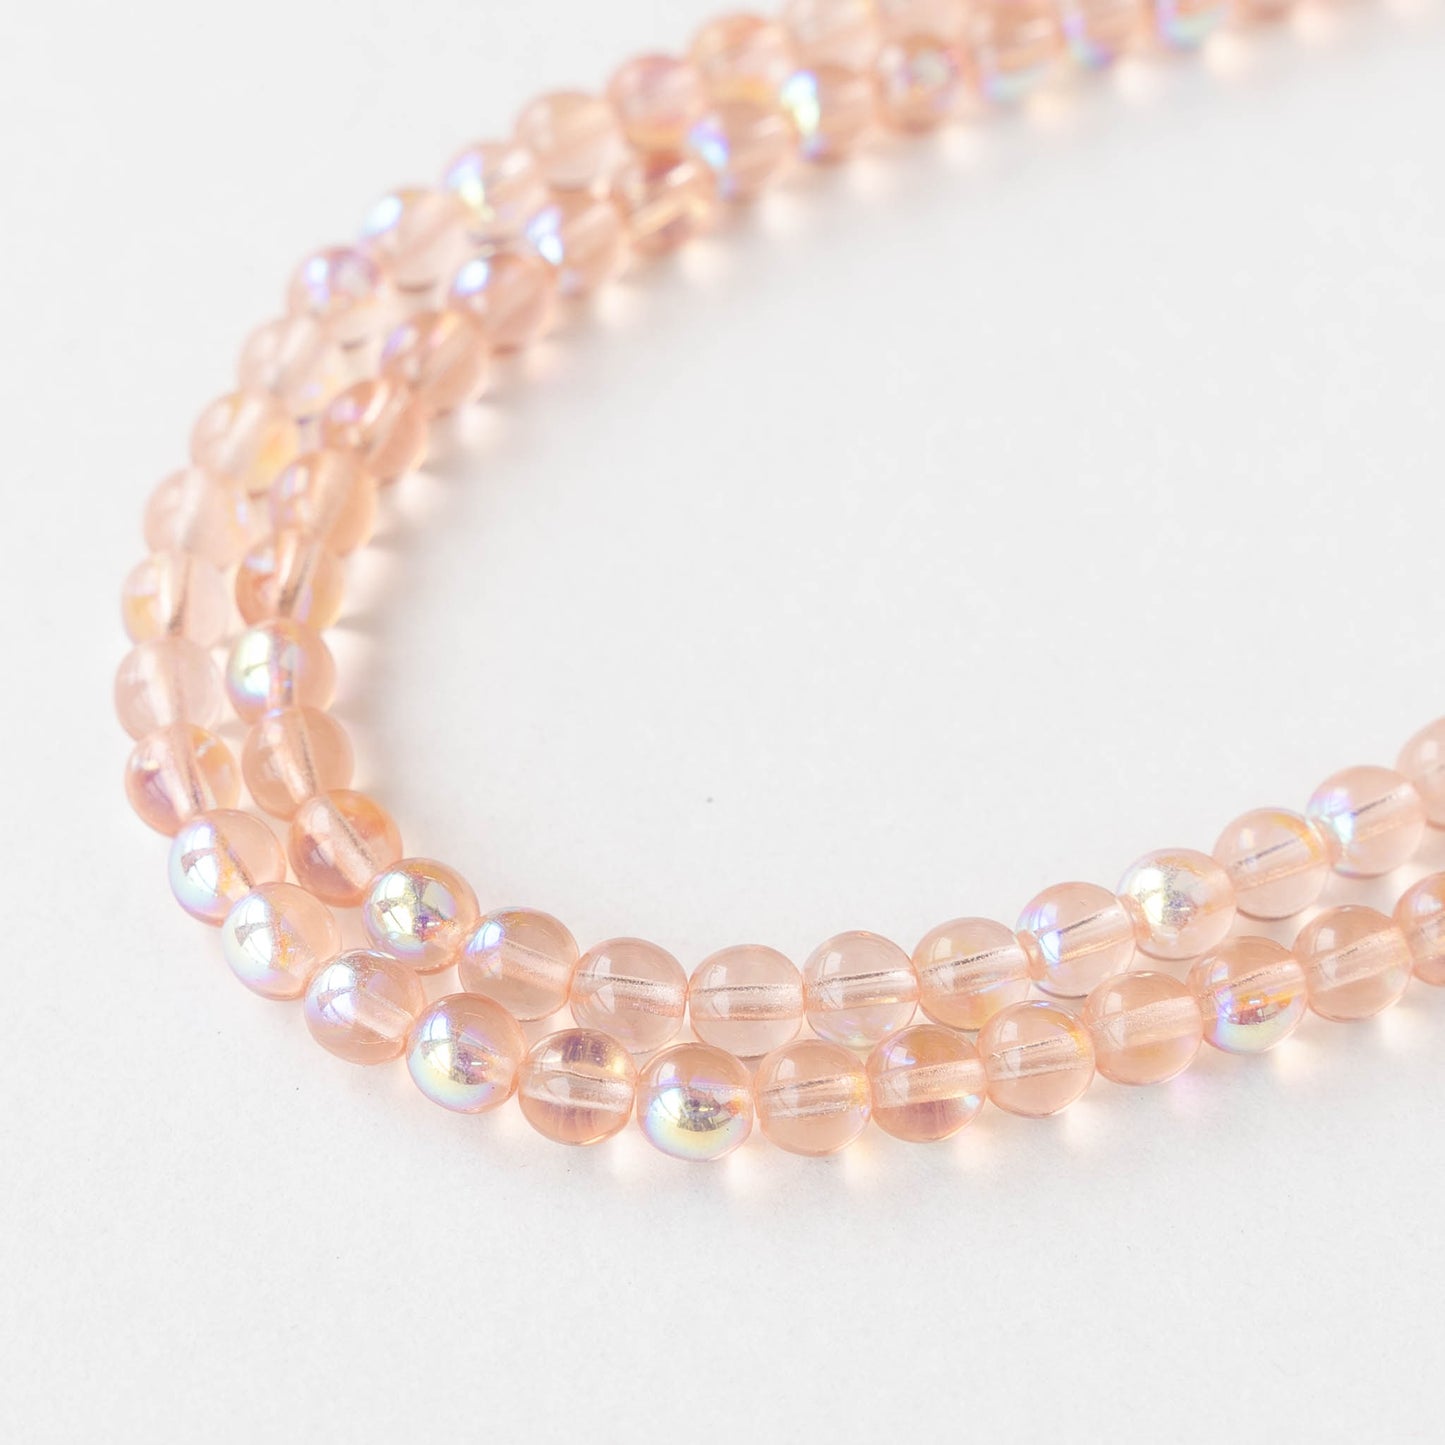 5mm Round Glass Beads - Rosaline Shimmer AB - 50 Beads